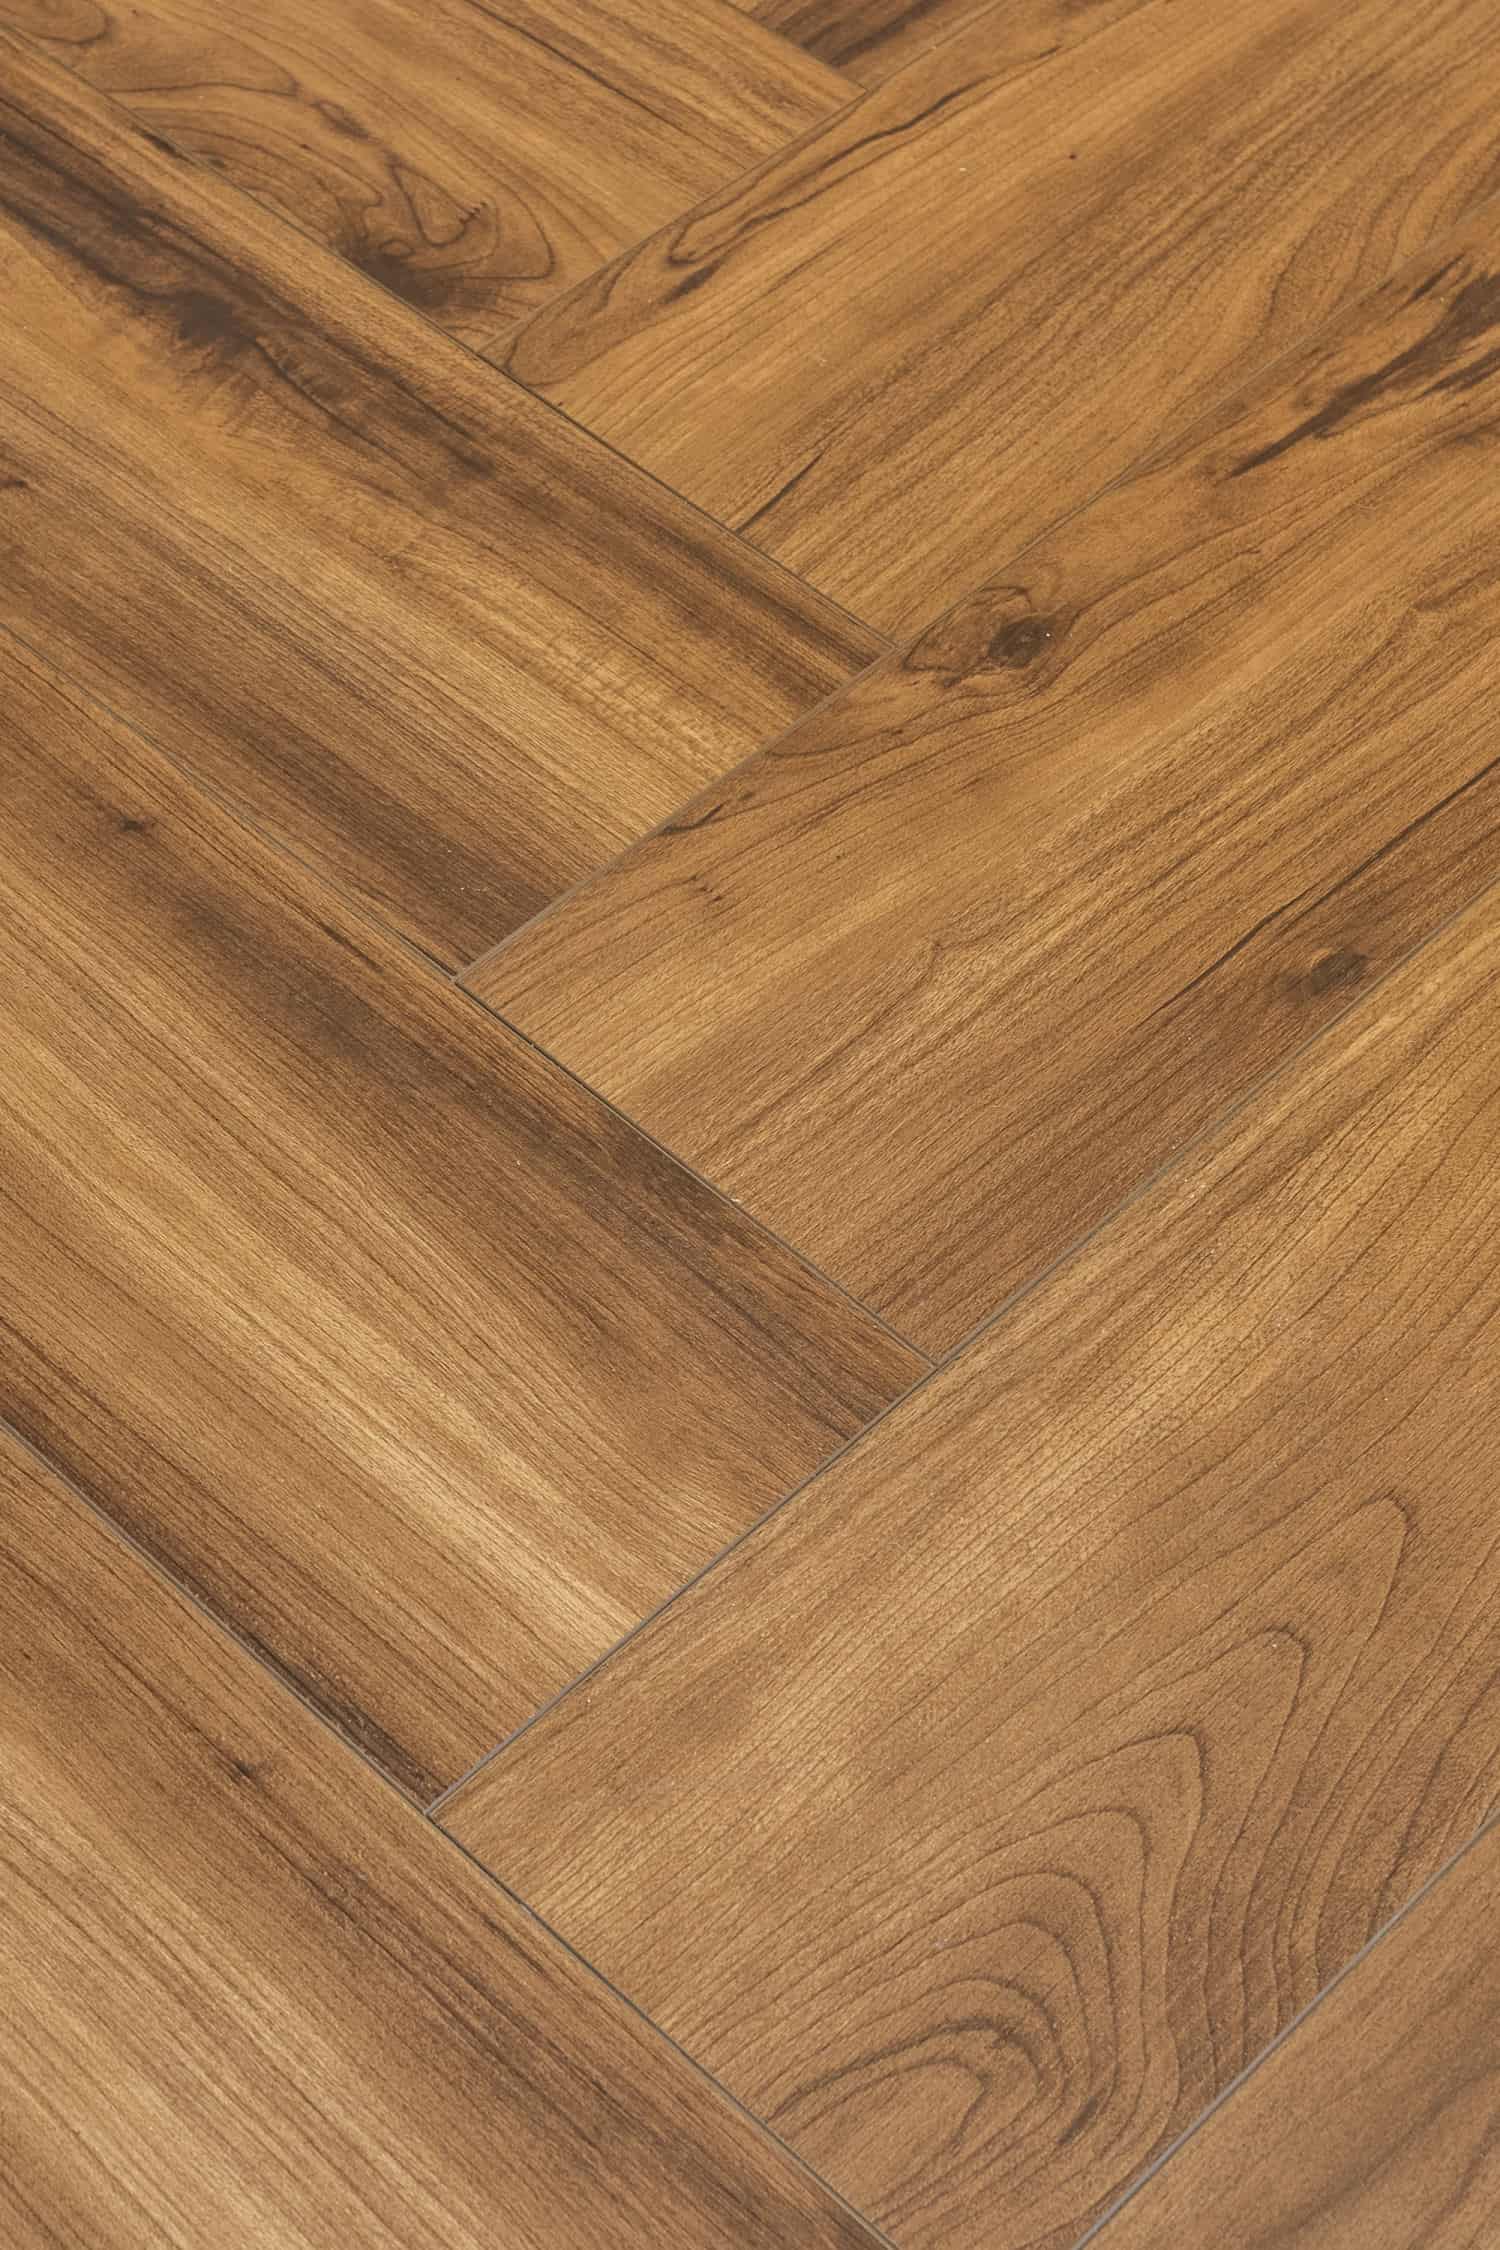 Nicholas Design Build | A close up view of a wooden floor with a herringbone pattern, perfect for a bathroom design incorporating black and blue elements.